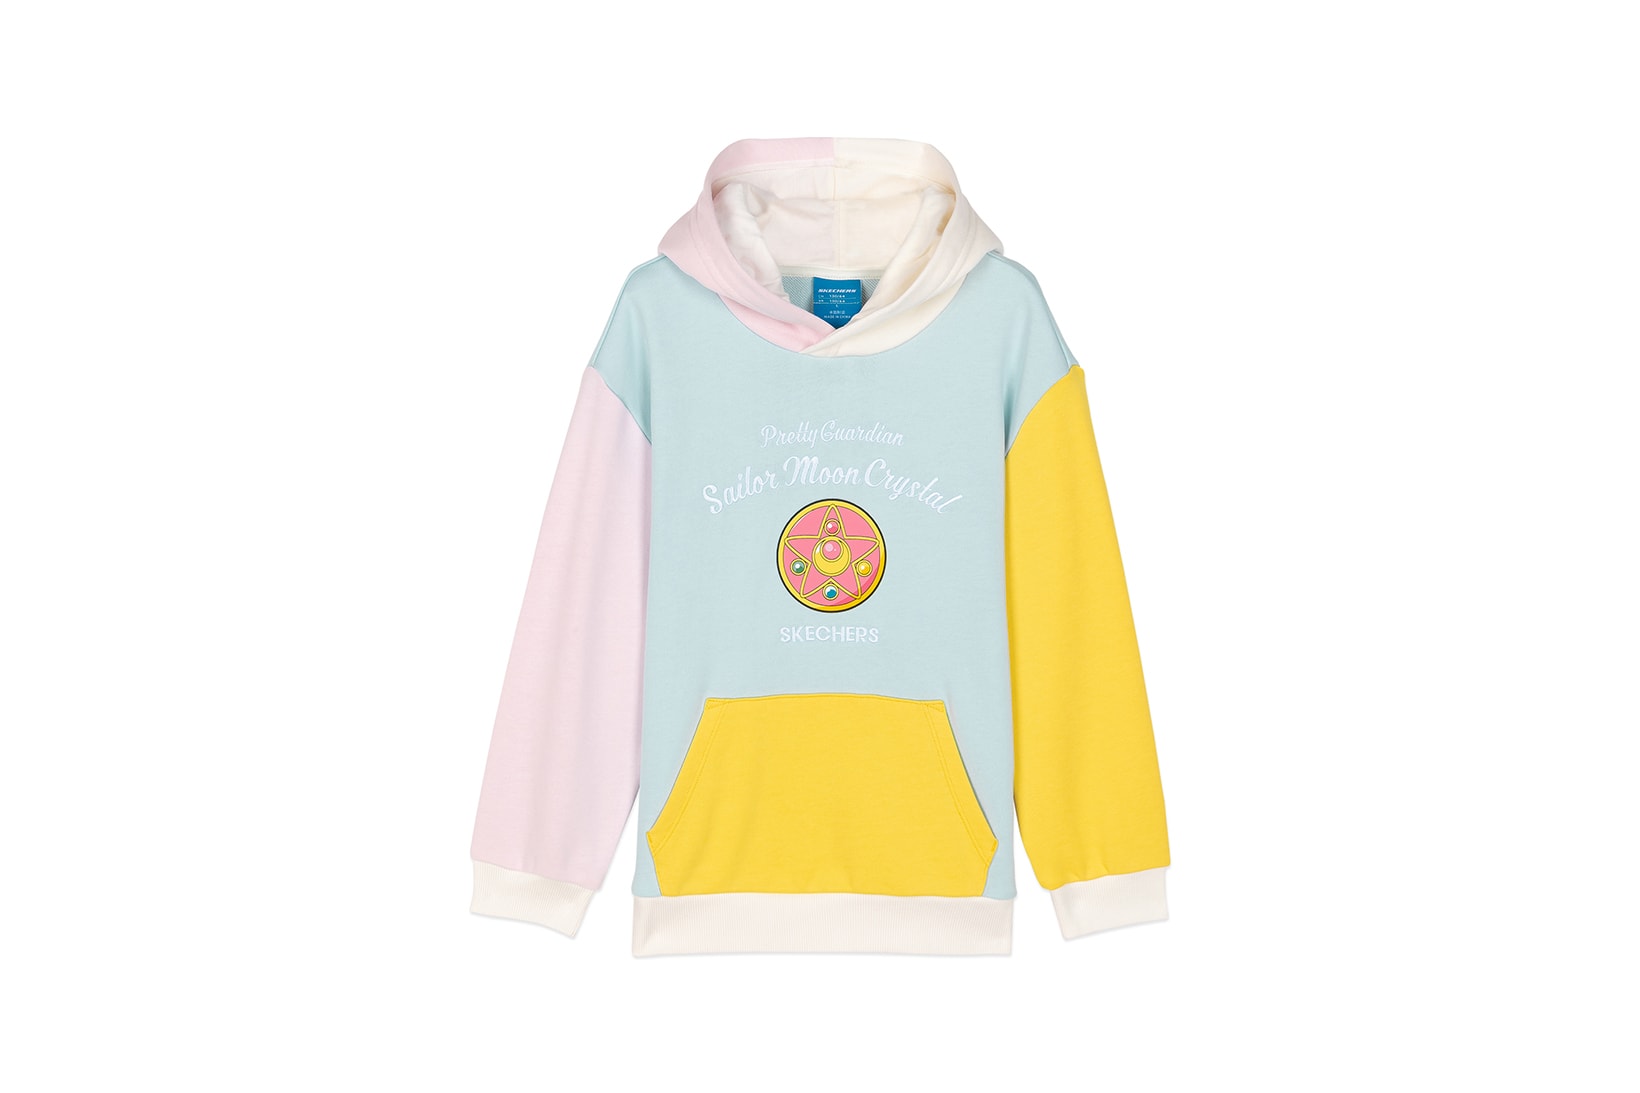 Skechers x Sailor Moon Crystal Collaboration Collection Hoodie T-Shirt